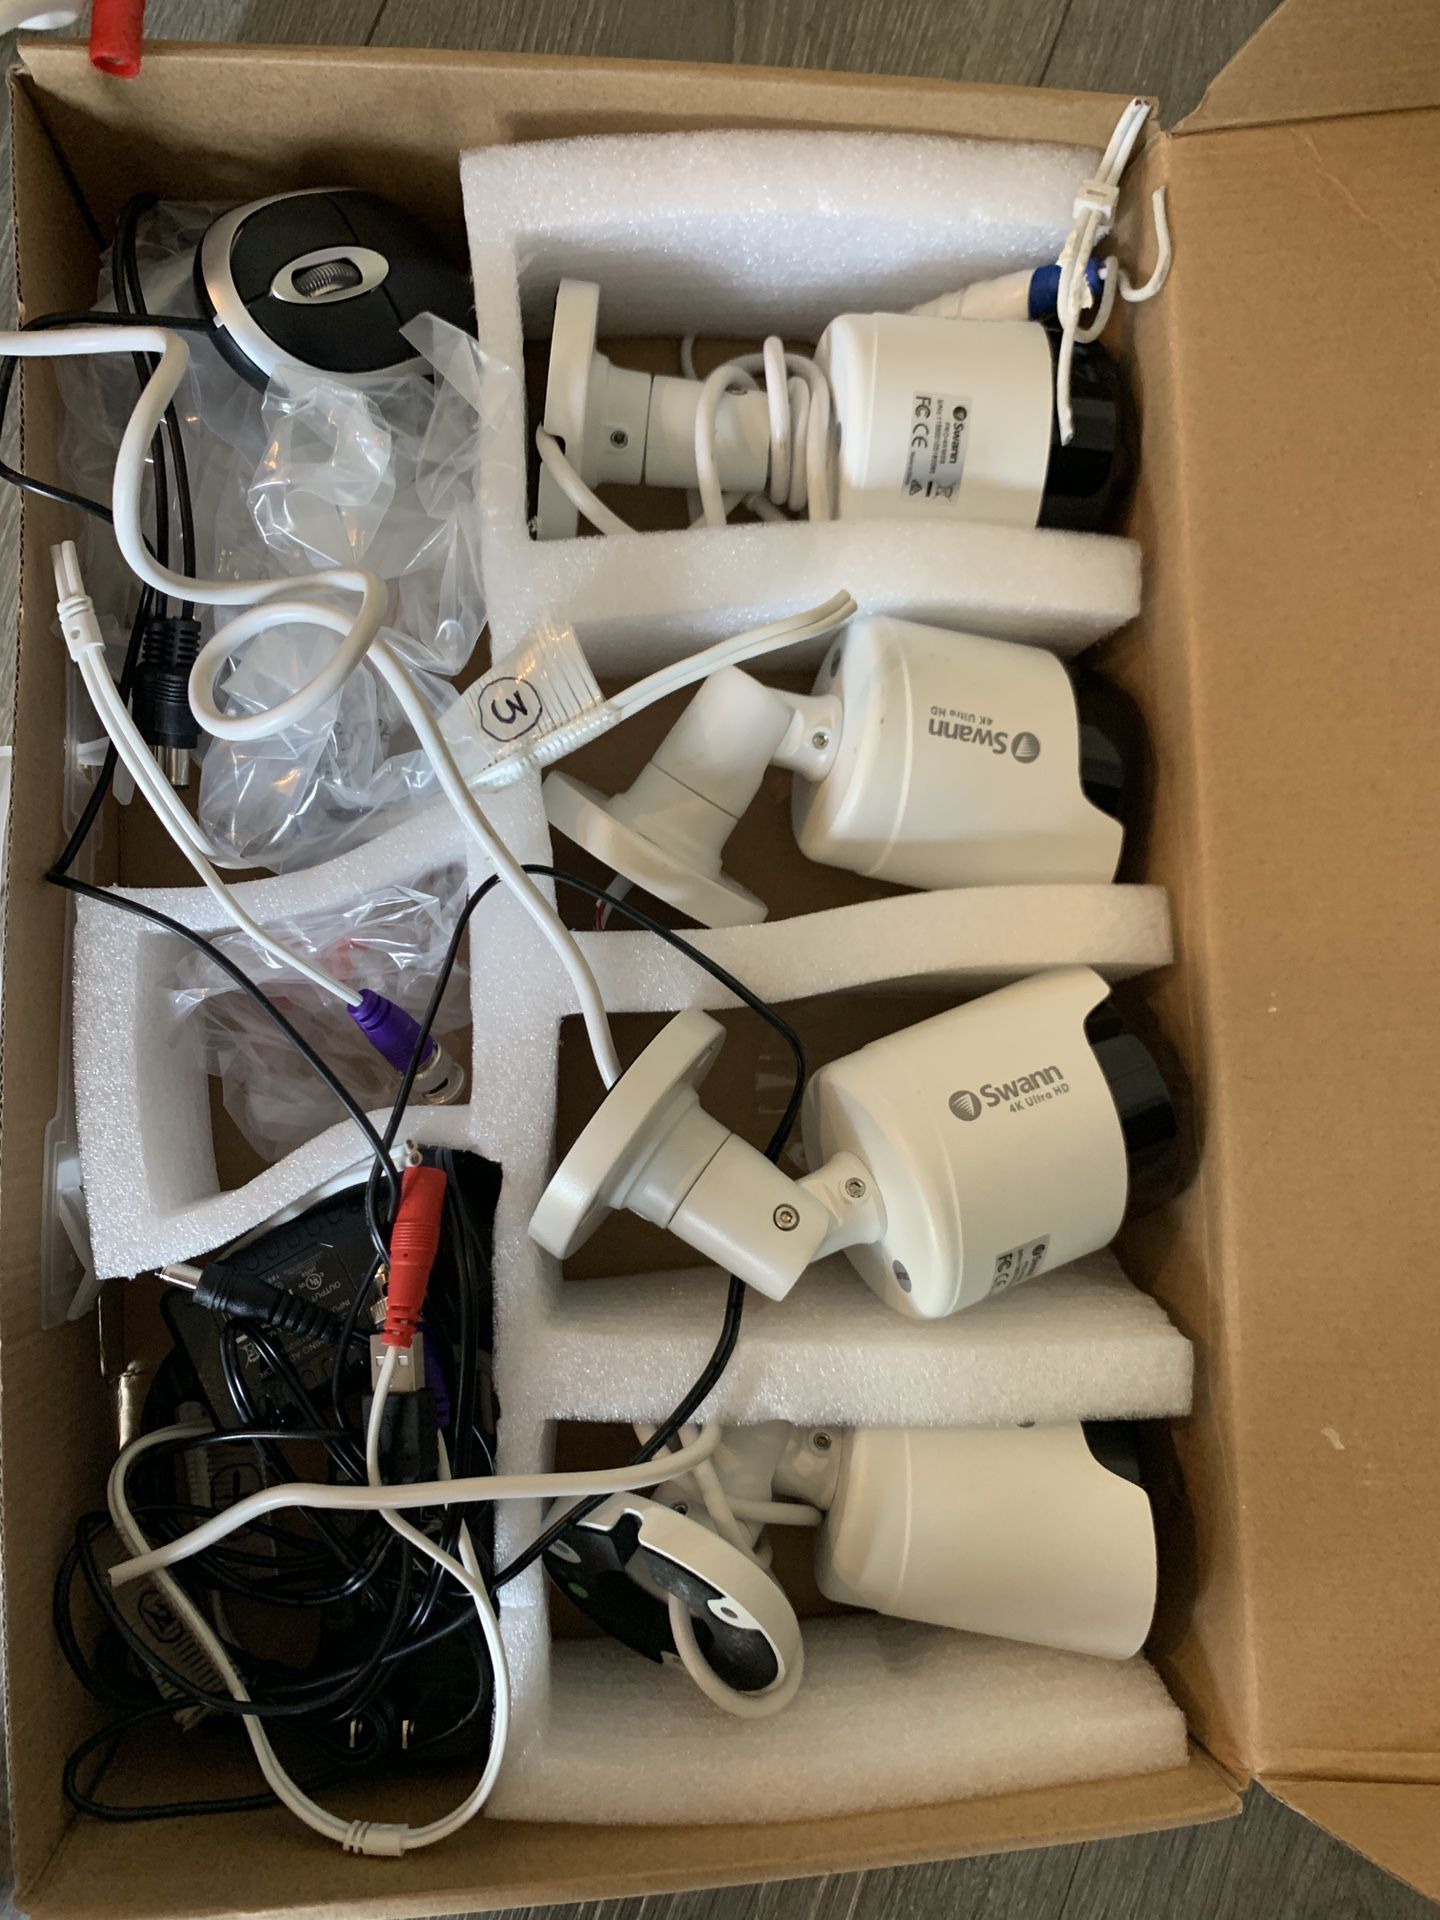 Swann Smart Security system 4K series missing parts